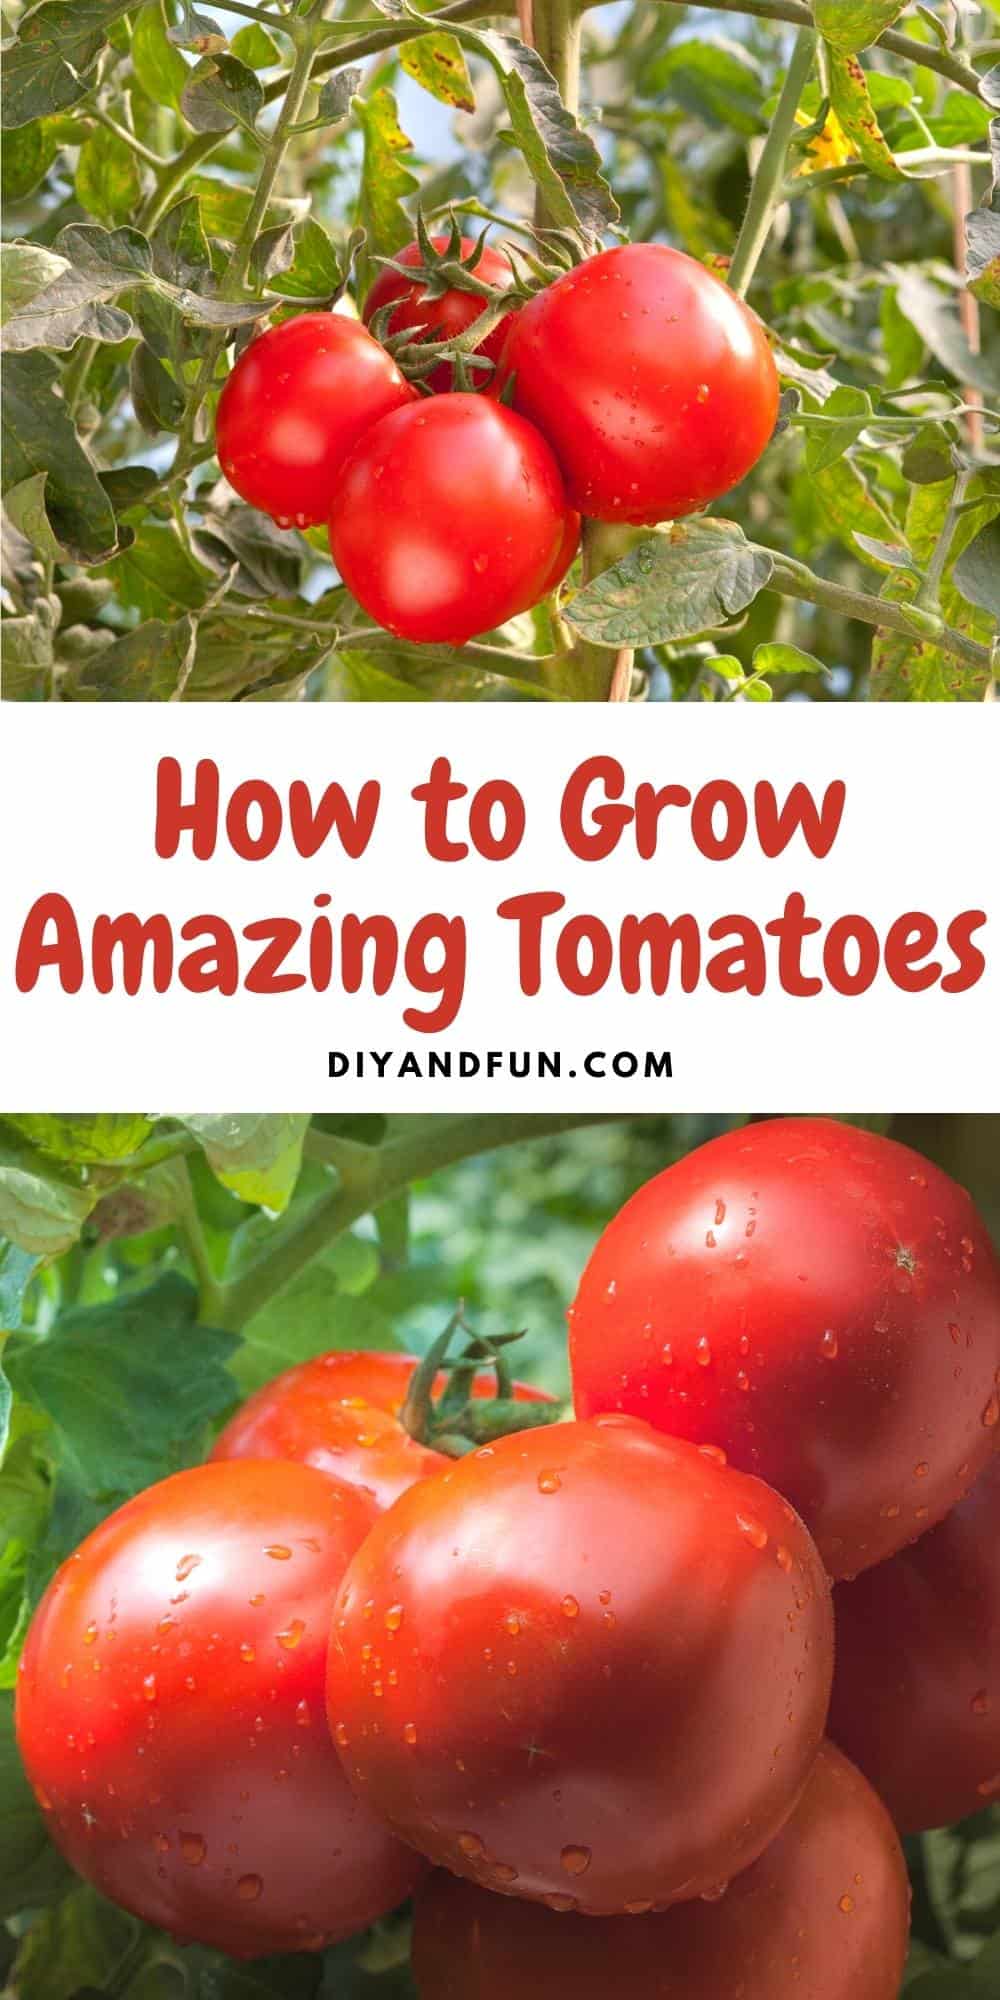 How to Grow Amazing Tomatoes, a simple guide for growing great tasting tomatoes without a lot of effort in doing so.